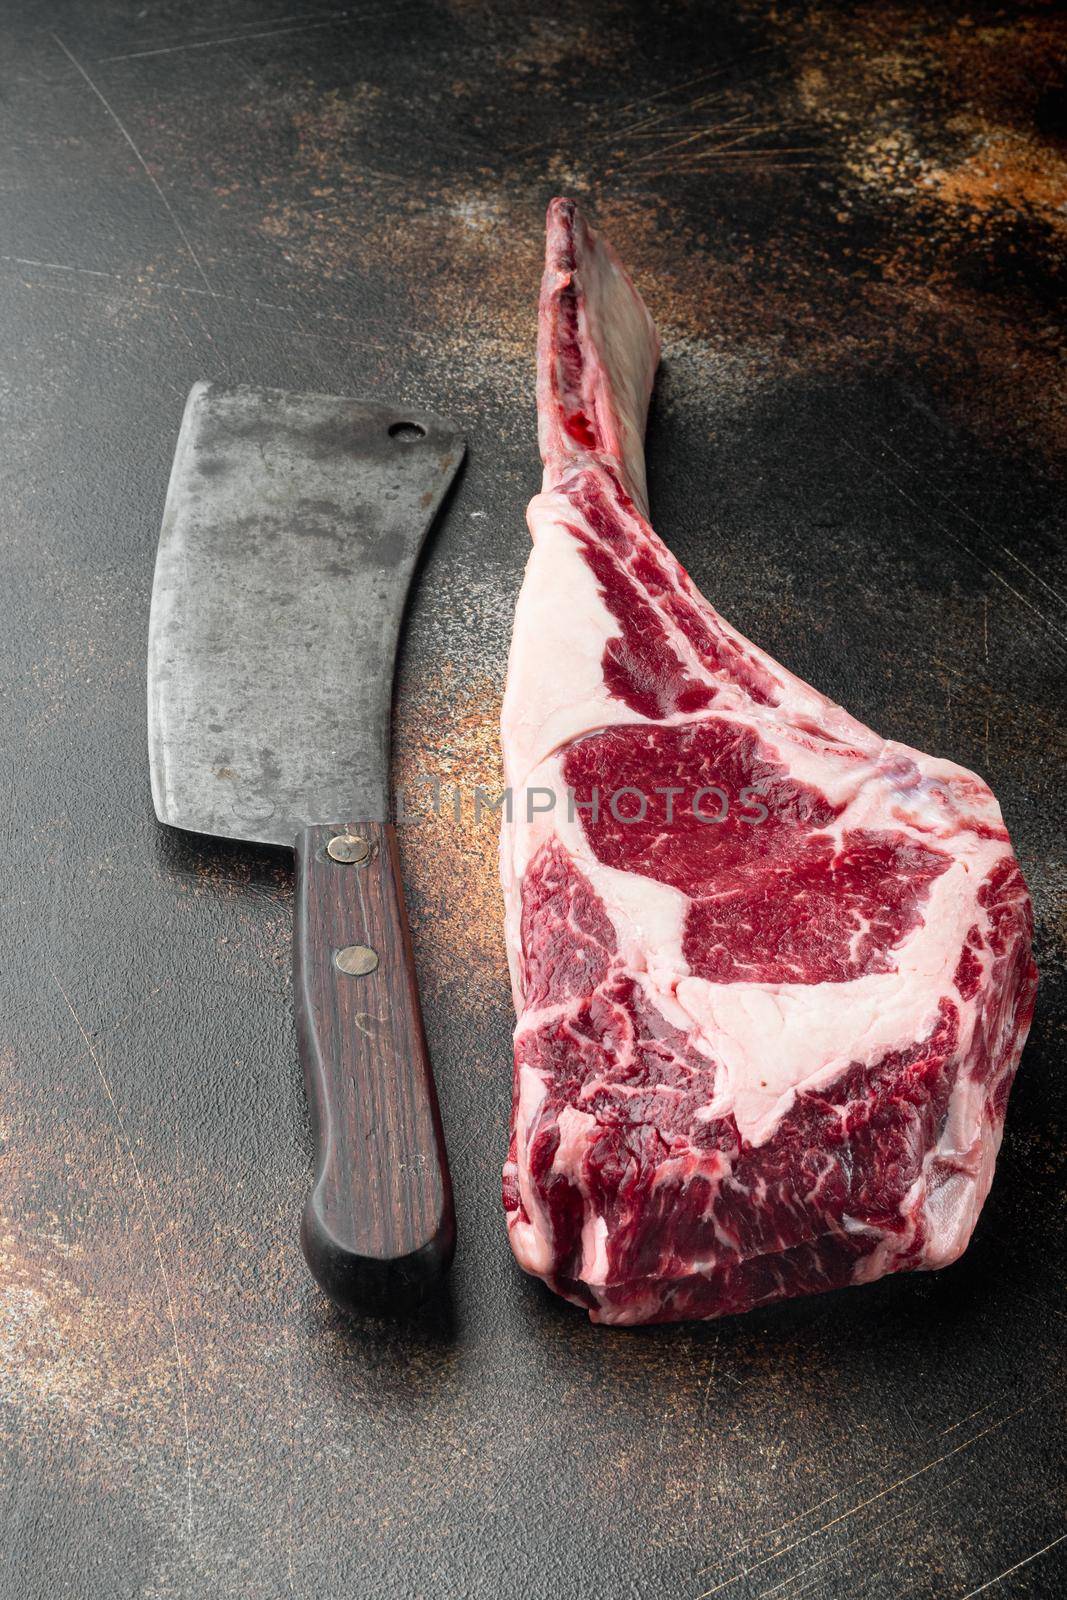 Dry aged raw tomahawk beef steak with ingredients for grilling, and old butcher cleaver knife, on old dark rustic background by Ilianesolenyi